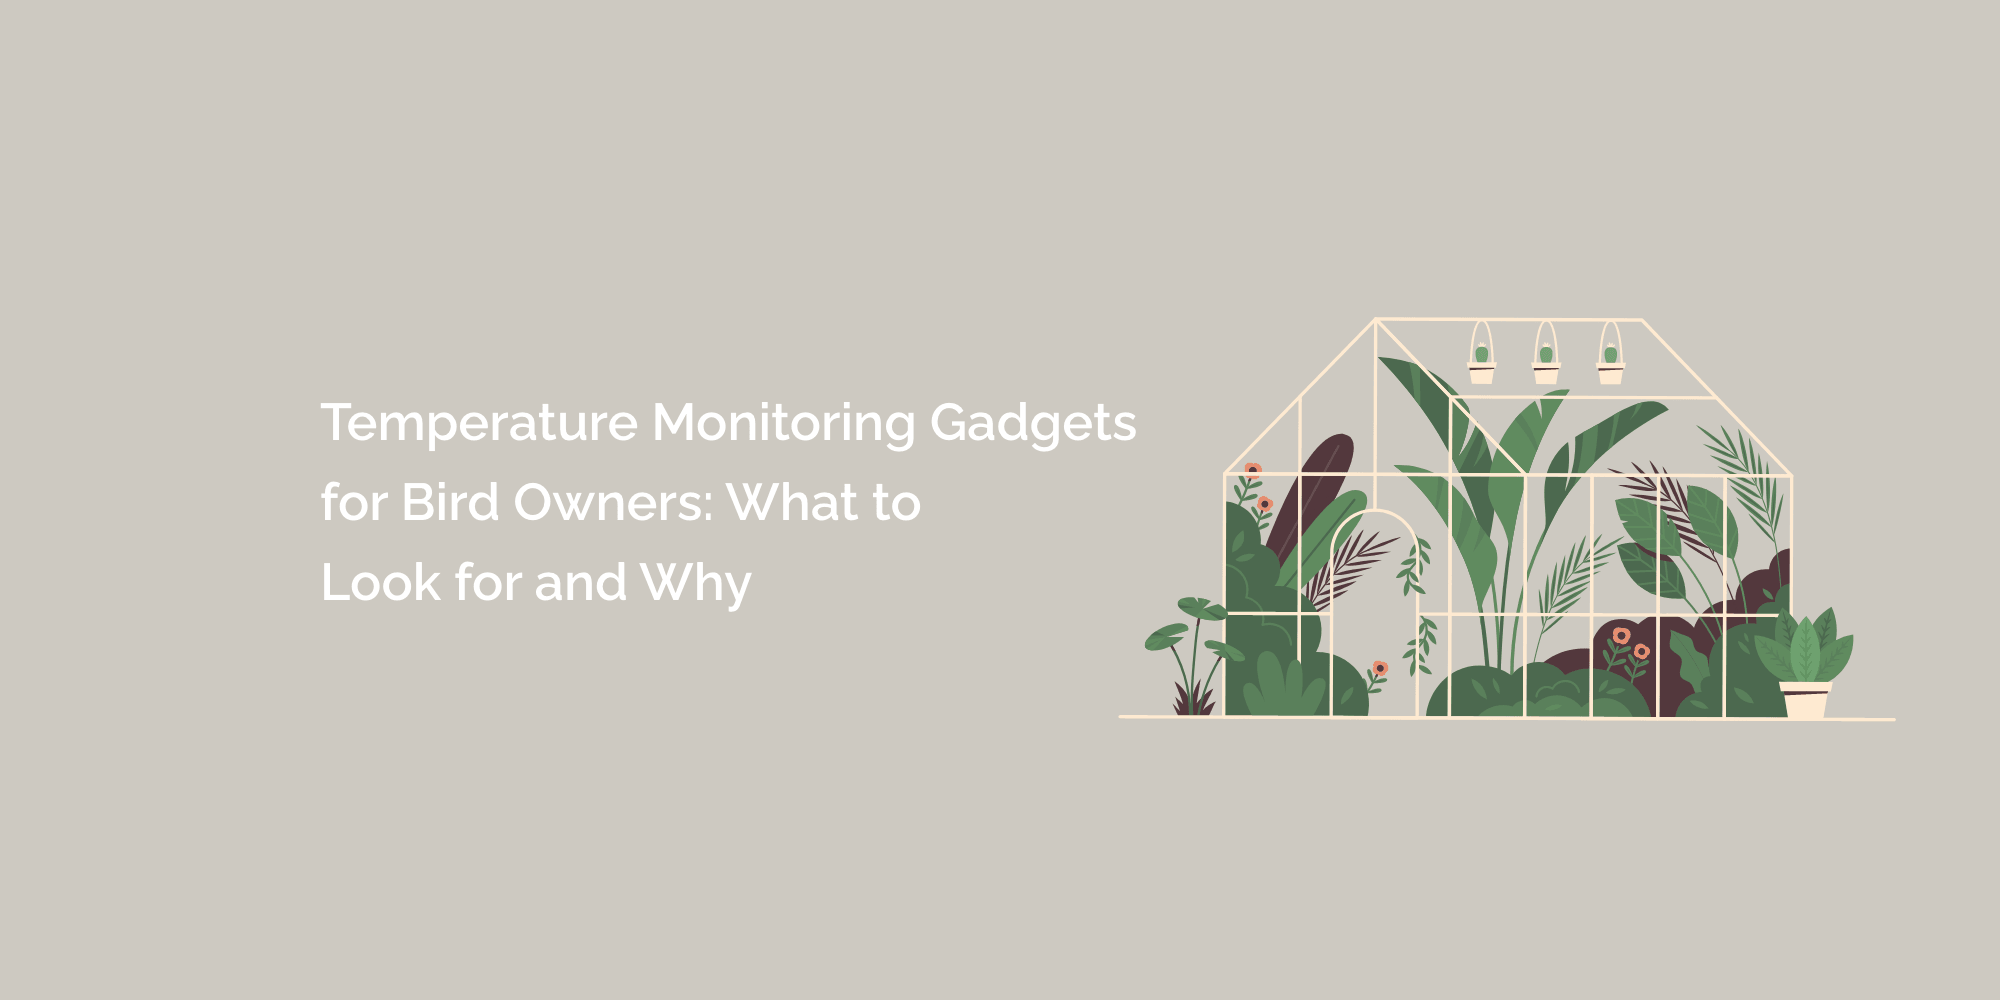 Temperature Monitoring Gadgets for Bird Owners: What to Look for and Why